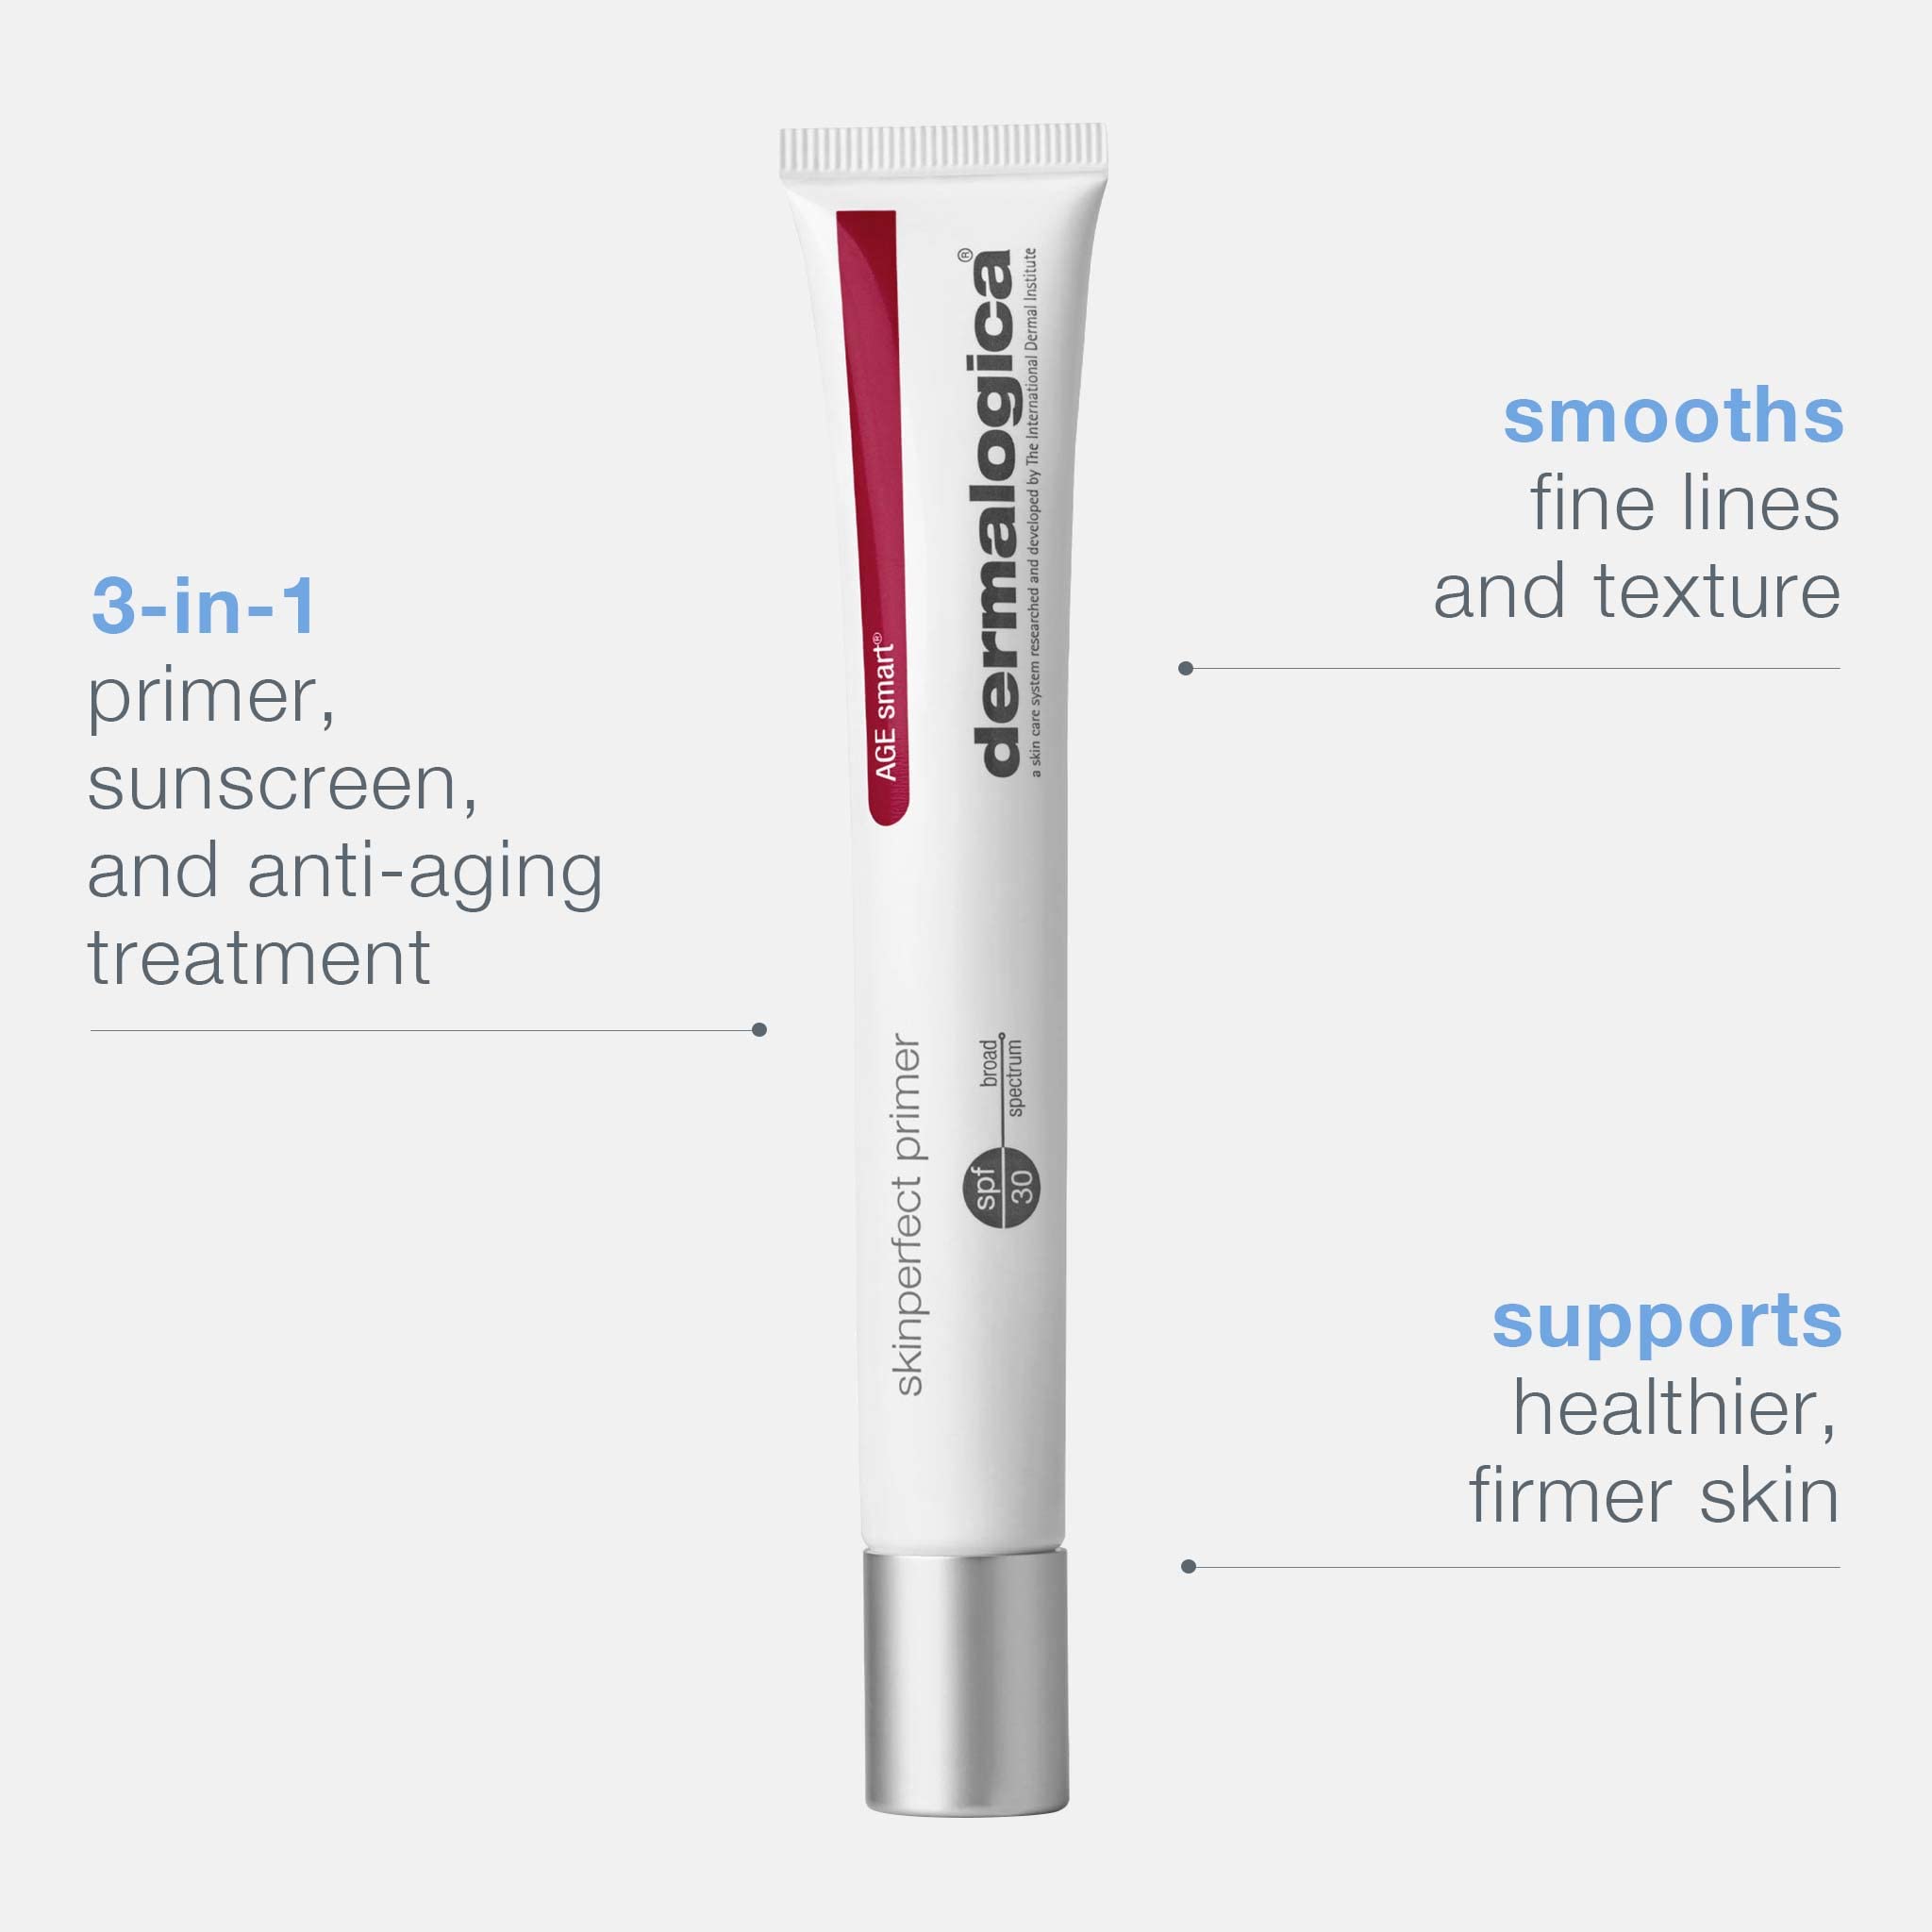 Dermalogica Skinperfect Primer SPF30, Anti-Aging Makeup Primer with Broad Spectrum Sunscreen - Brighten and Prime For Flawless Skin, 0.75 Fl Oz (Pack of 1)